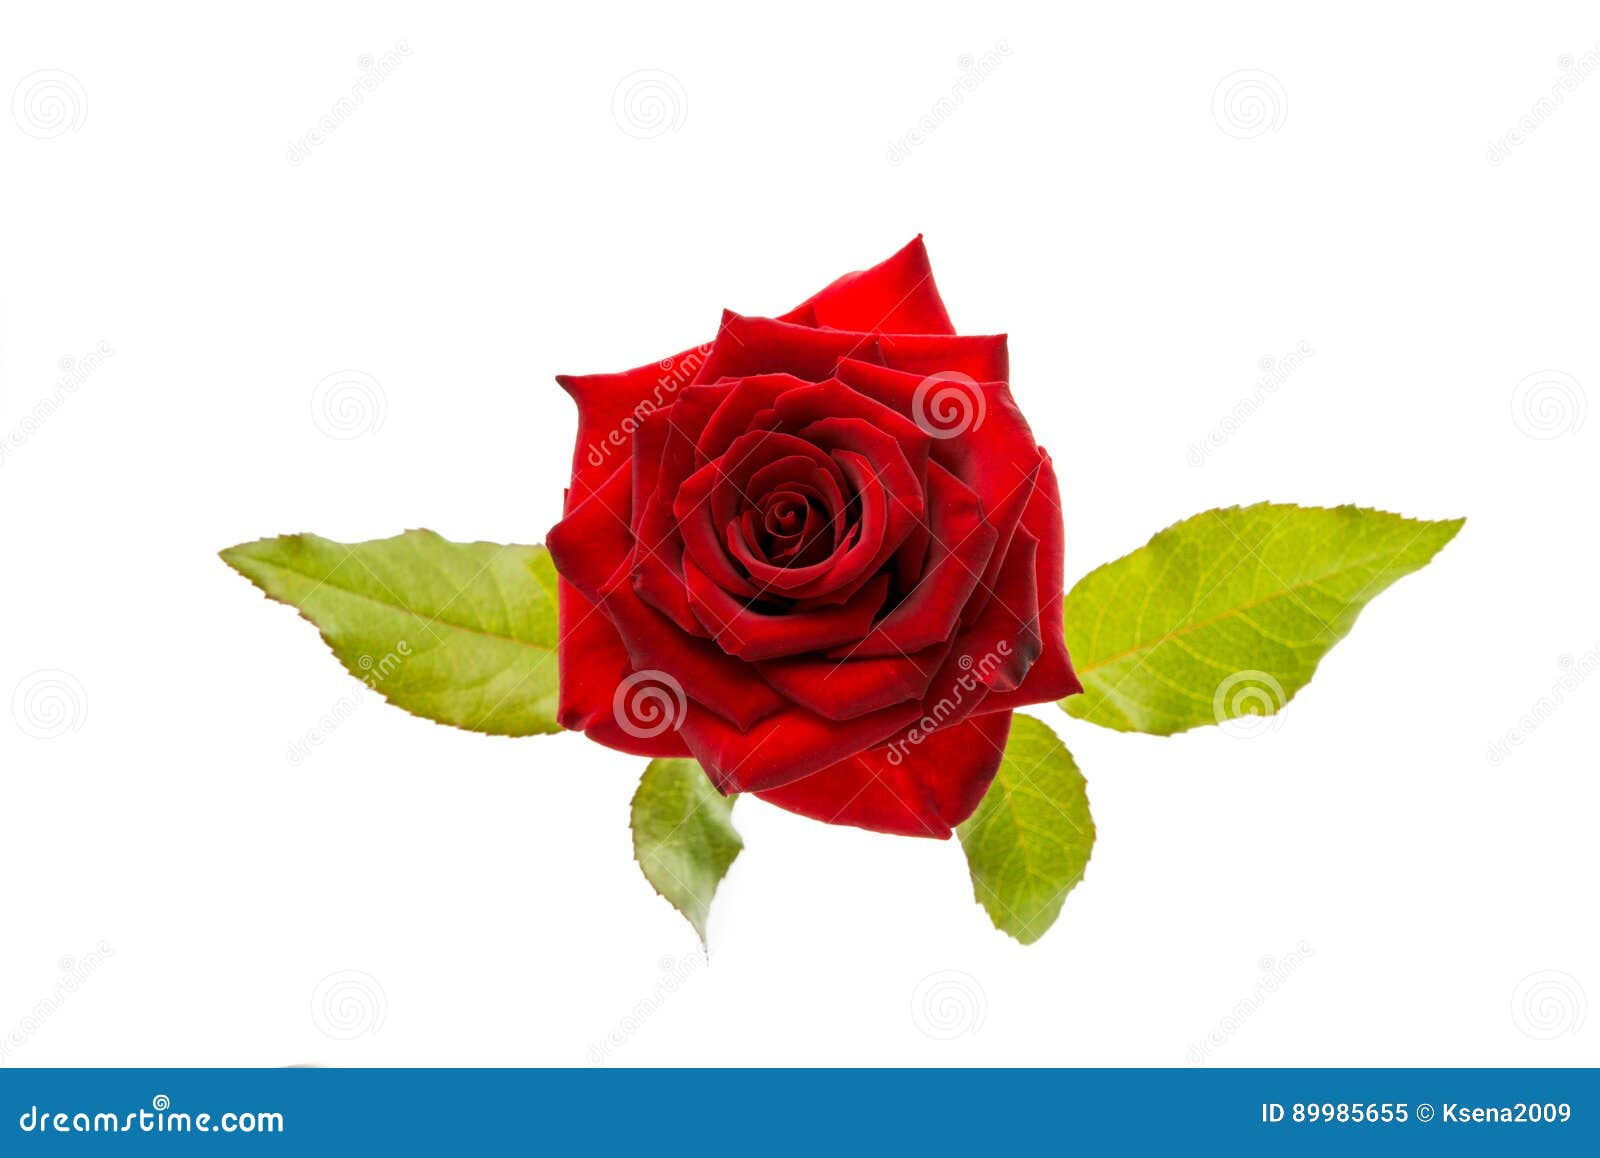 Red rose isolated stock image. Image of petal, center - 89985655